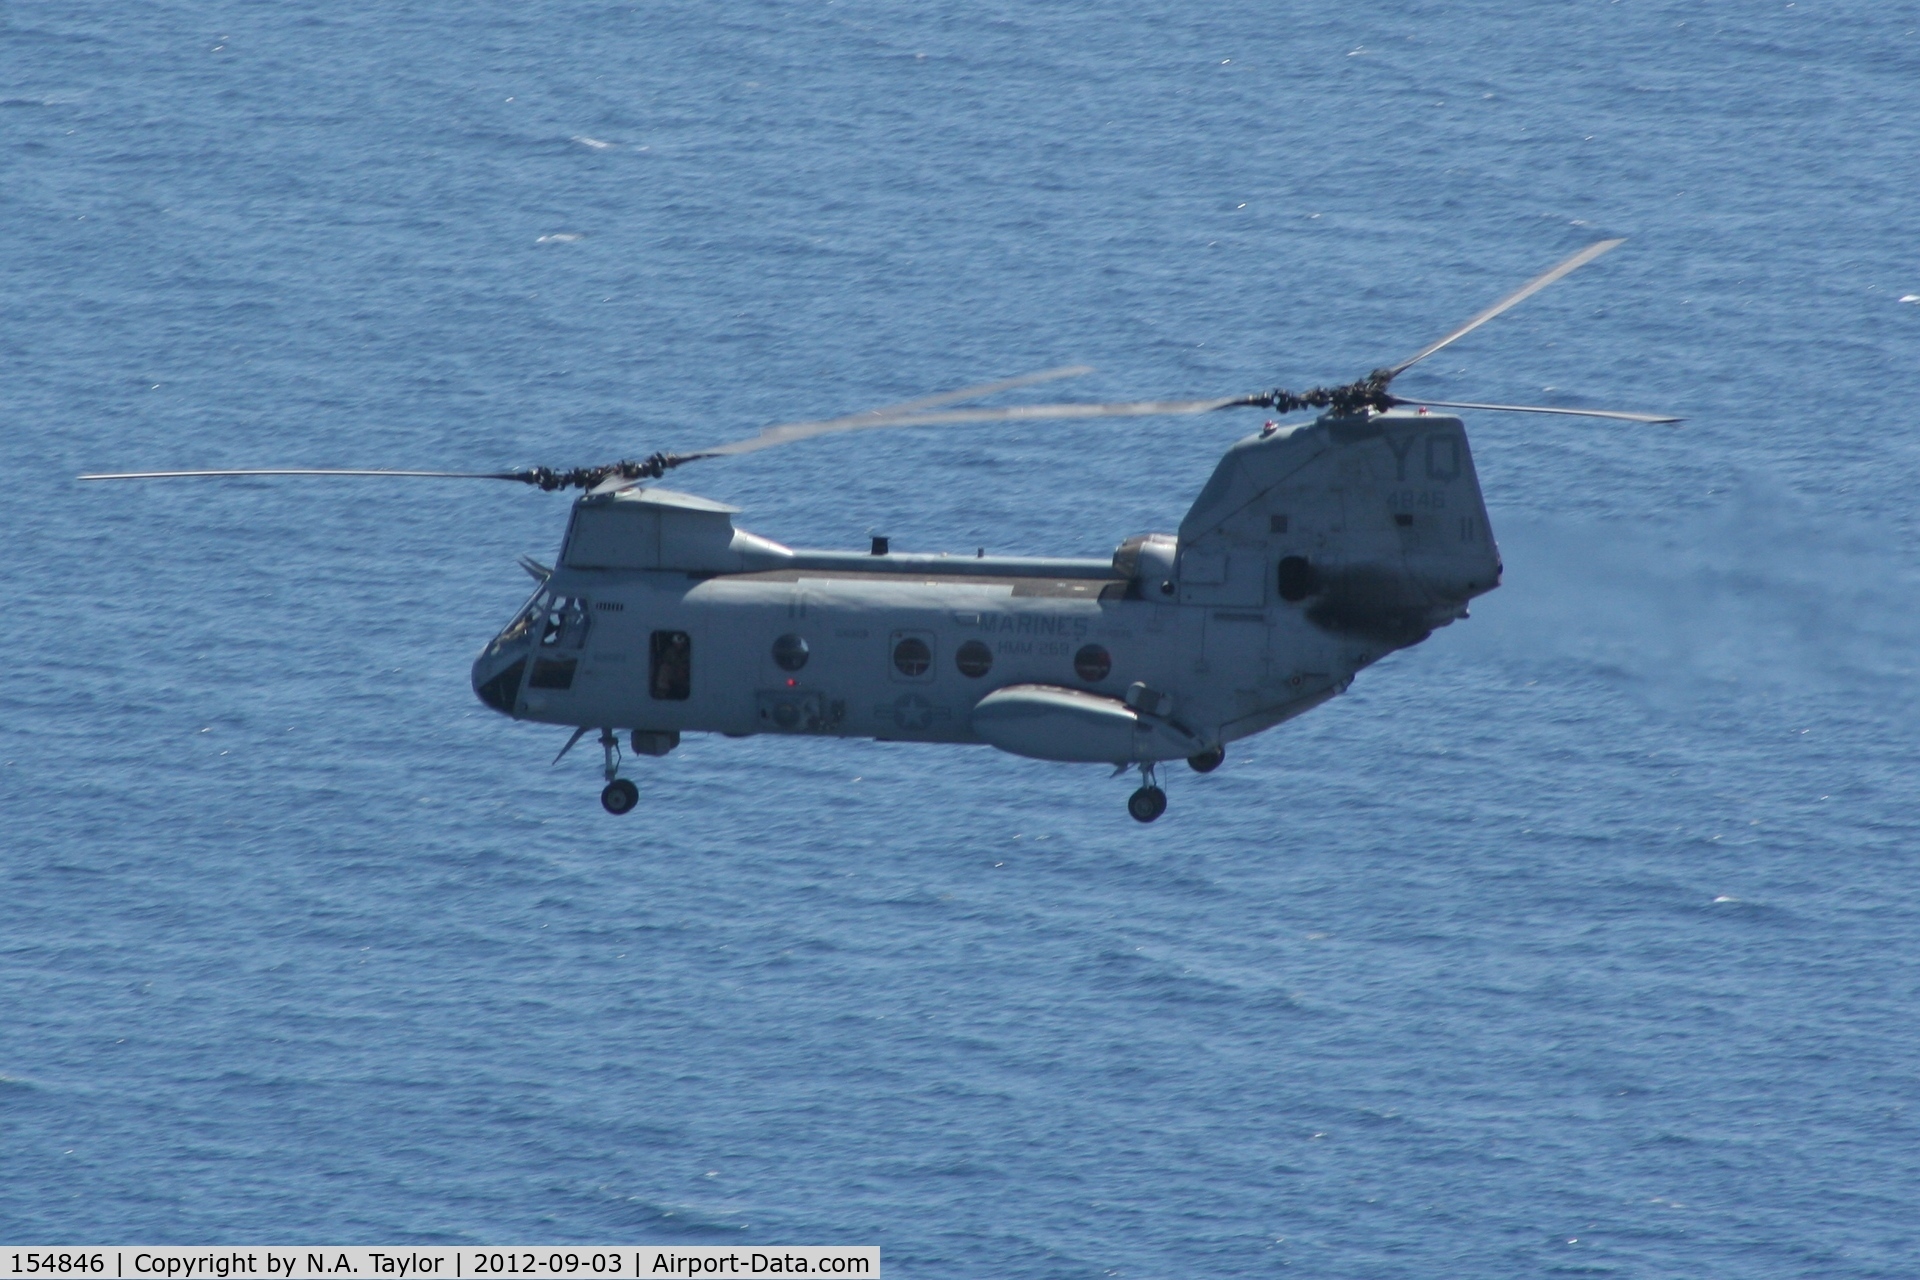 154846, Boeing Vertol CH-46F Sea Knight C/N 2453, Passing along with 154011